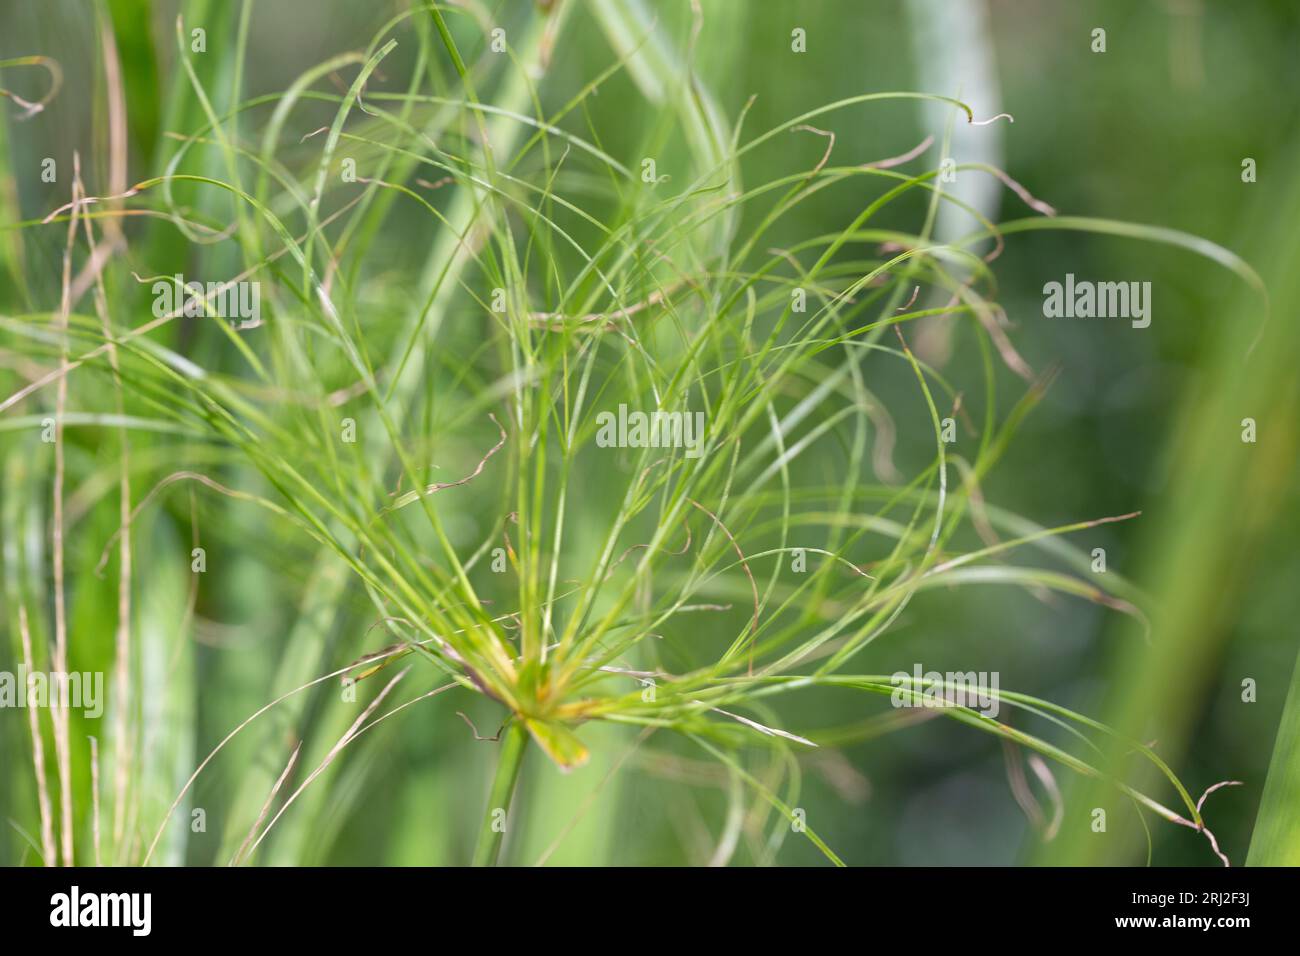 Whorling umbels of a growing Egyptian paper rush plant/ papyrus sedge, Cyperus papyrus. Stock Photo